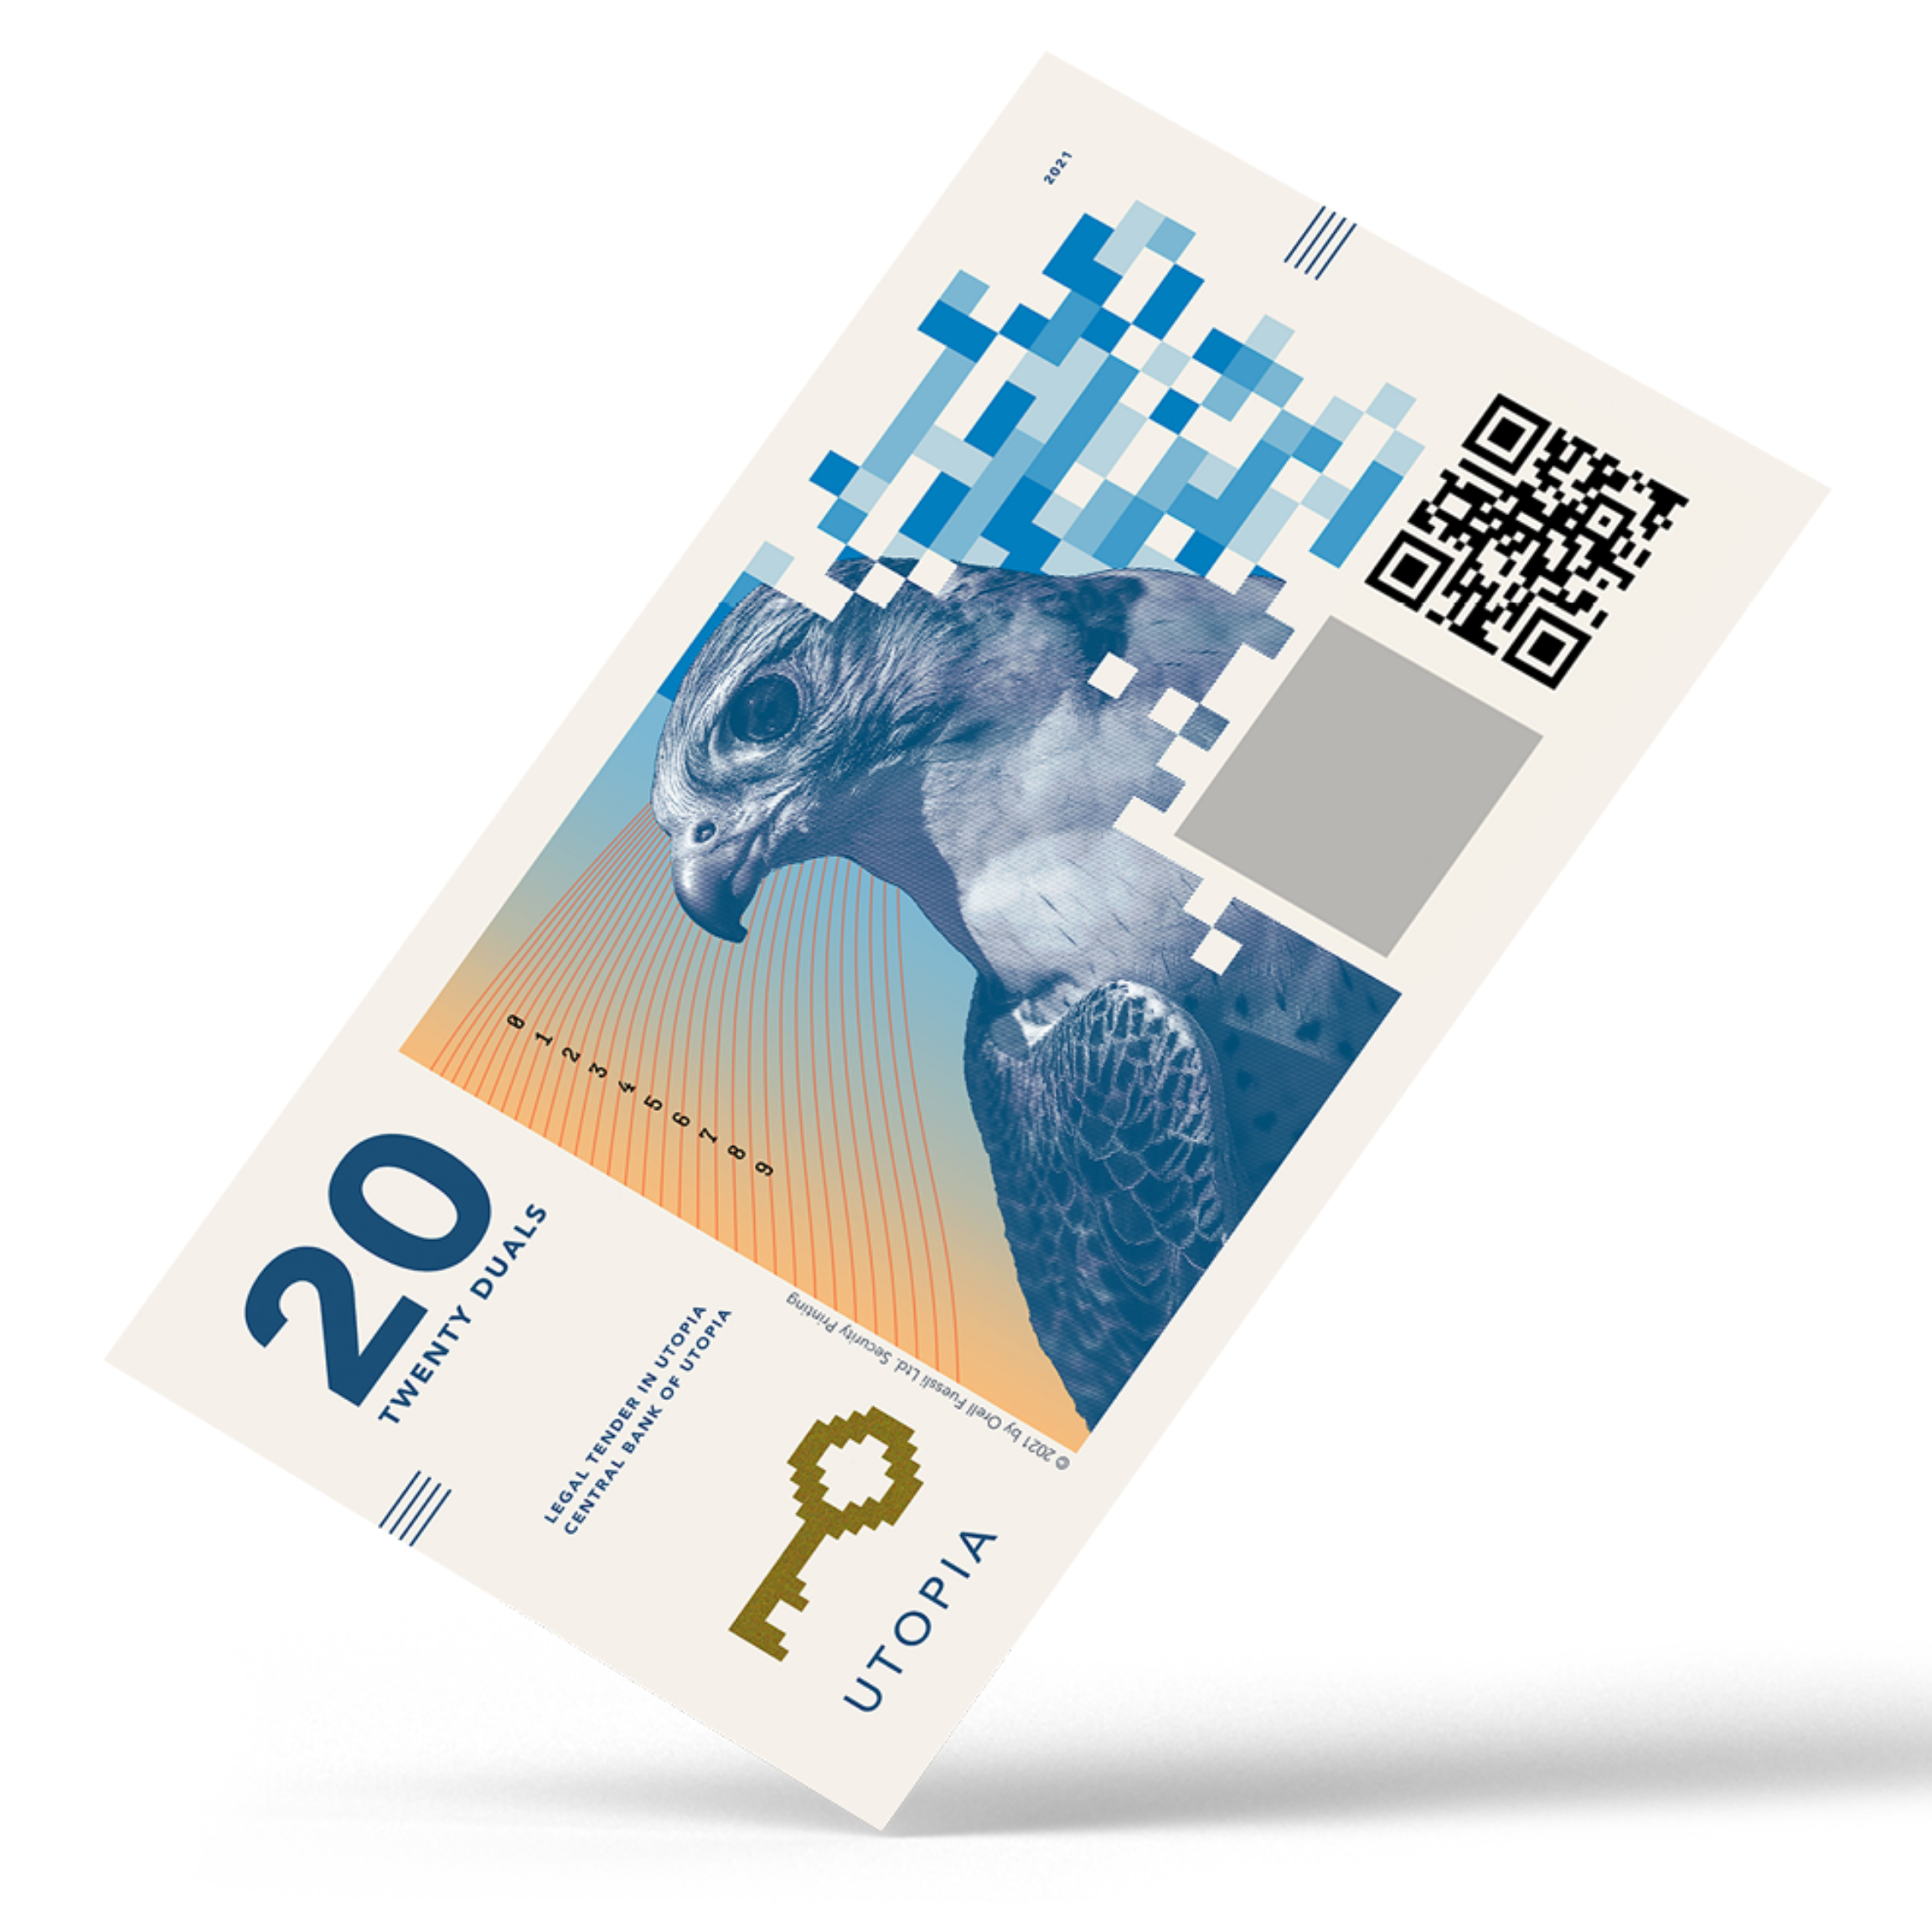 OFS and AUGENTIC GmbH reveal the design of the offline "Smart Banknote CBDC" prototype